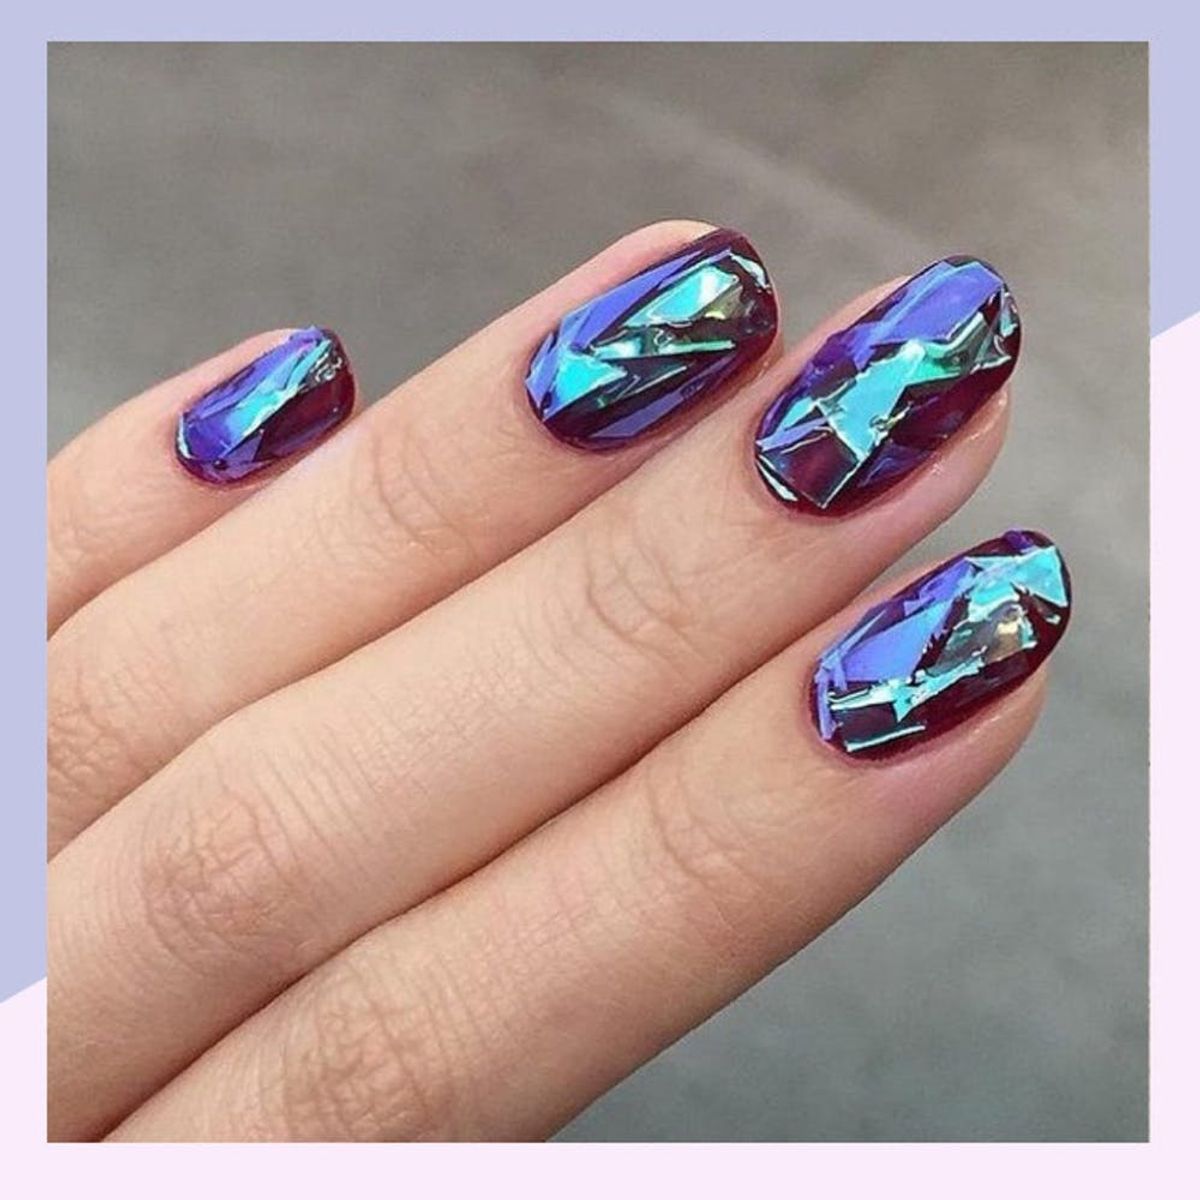 11 Ways to Rock a Gemstone Manicure for All Your End-of-Year Festivities